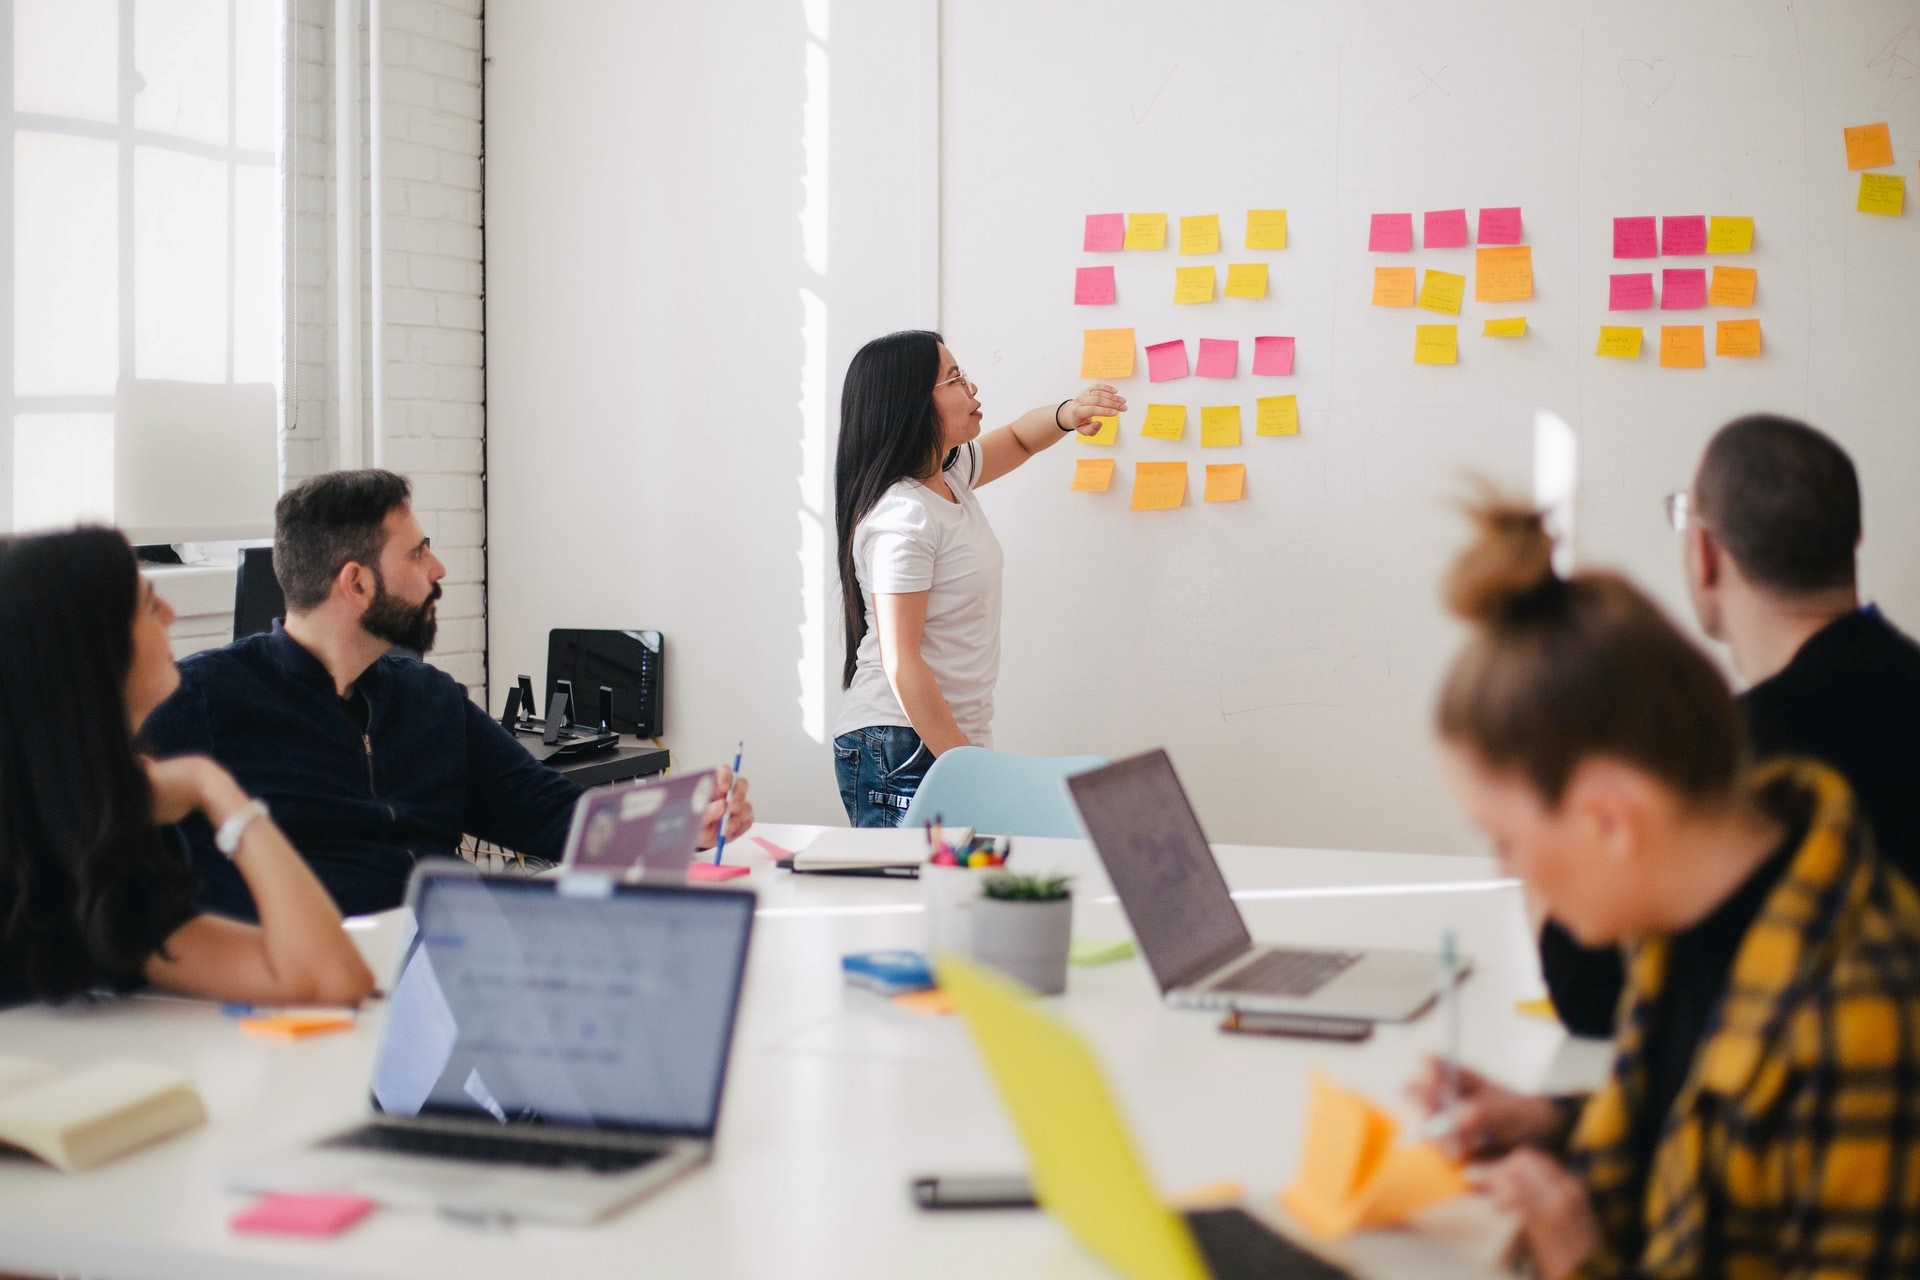 How You Can Use Design Thinking to Start Your Own Business